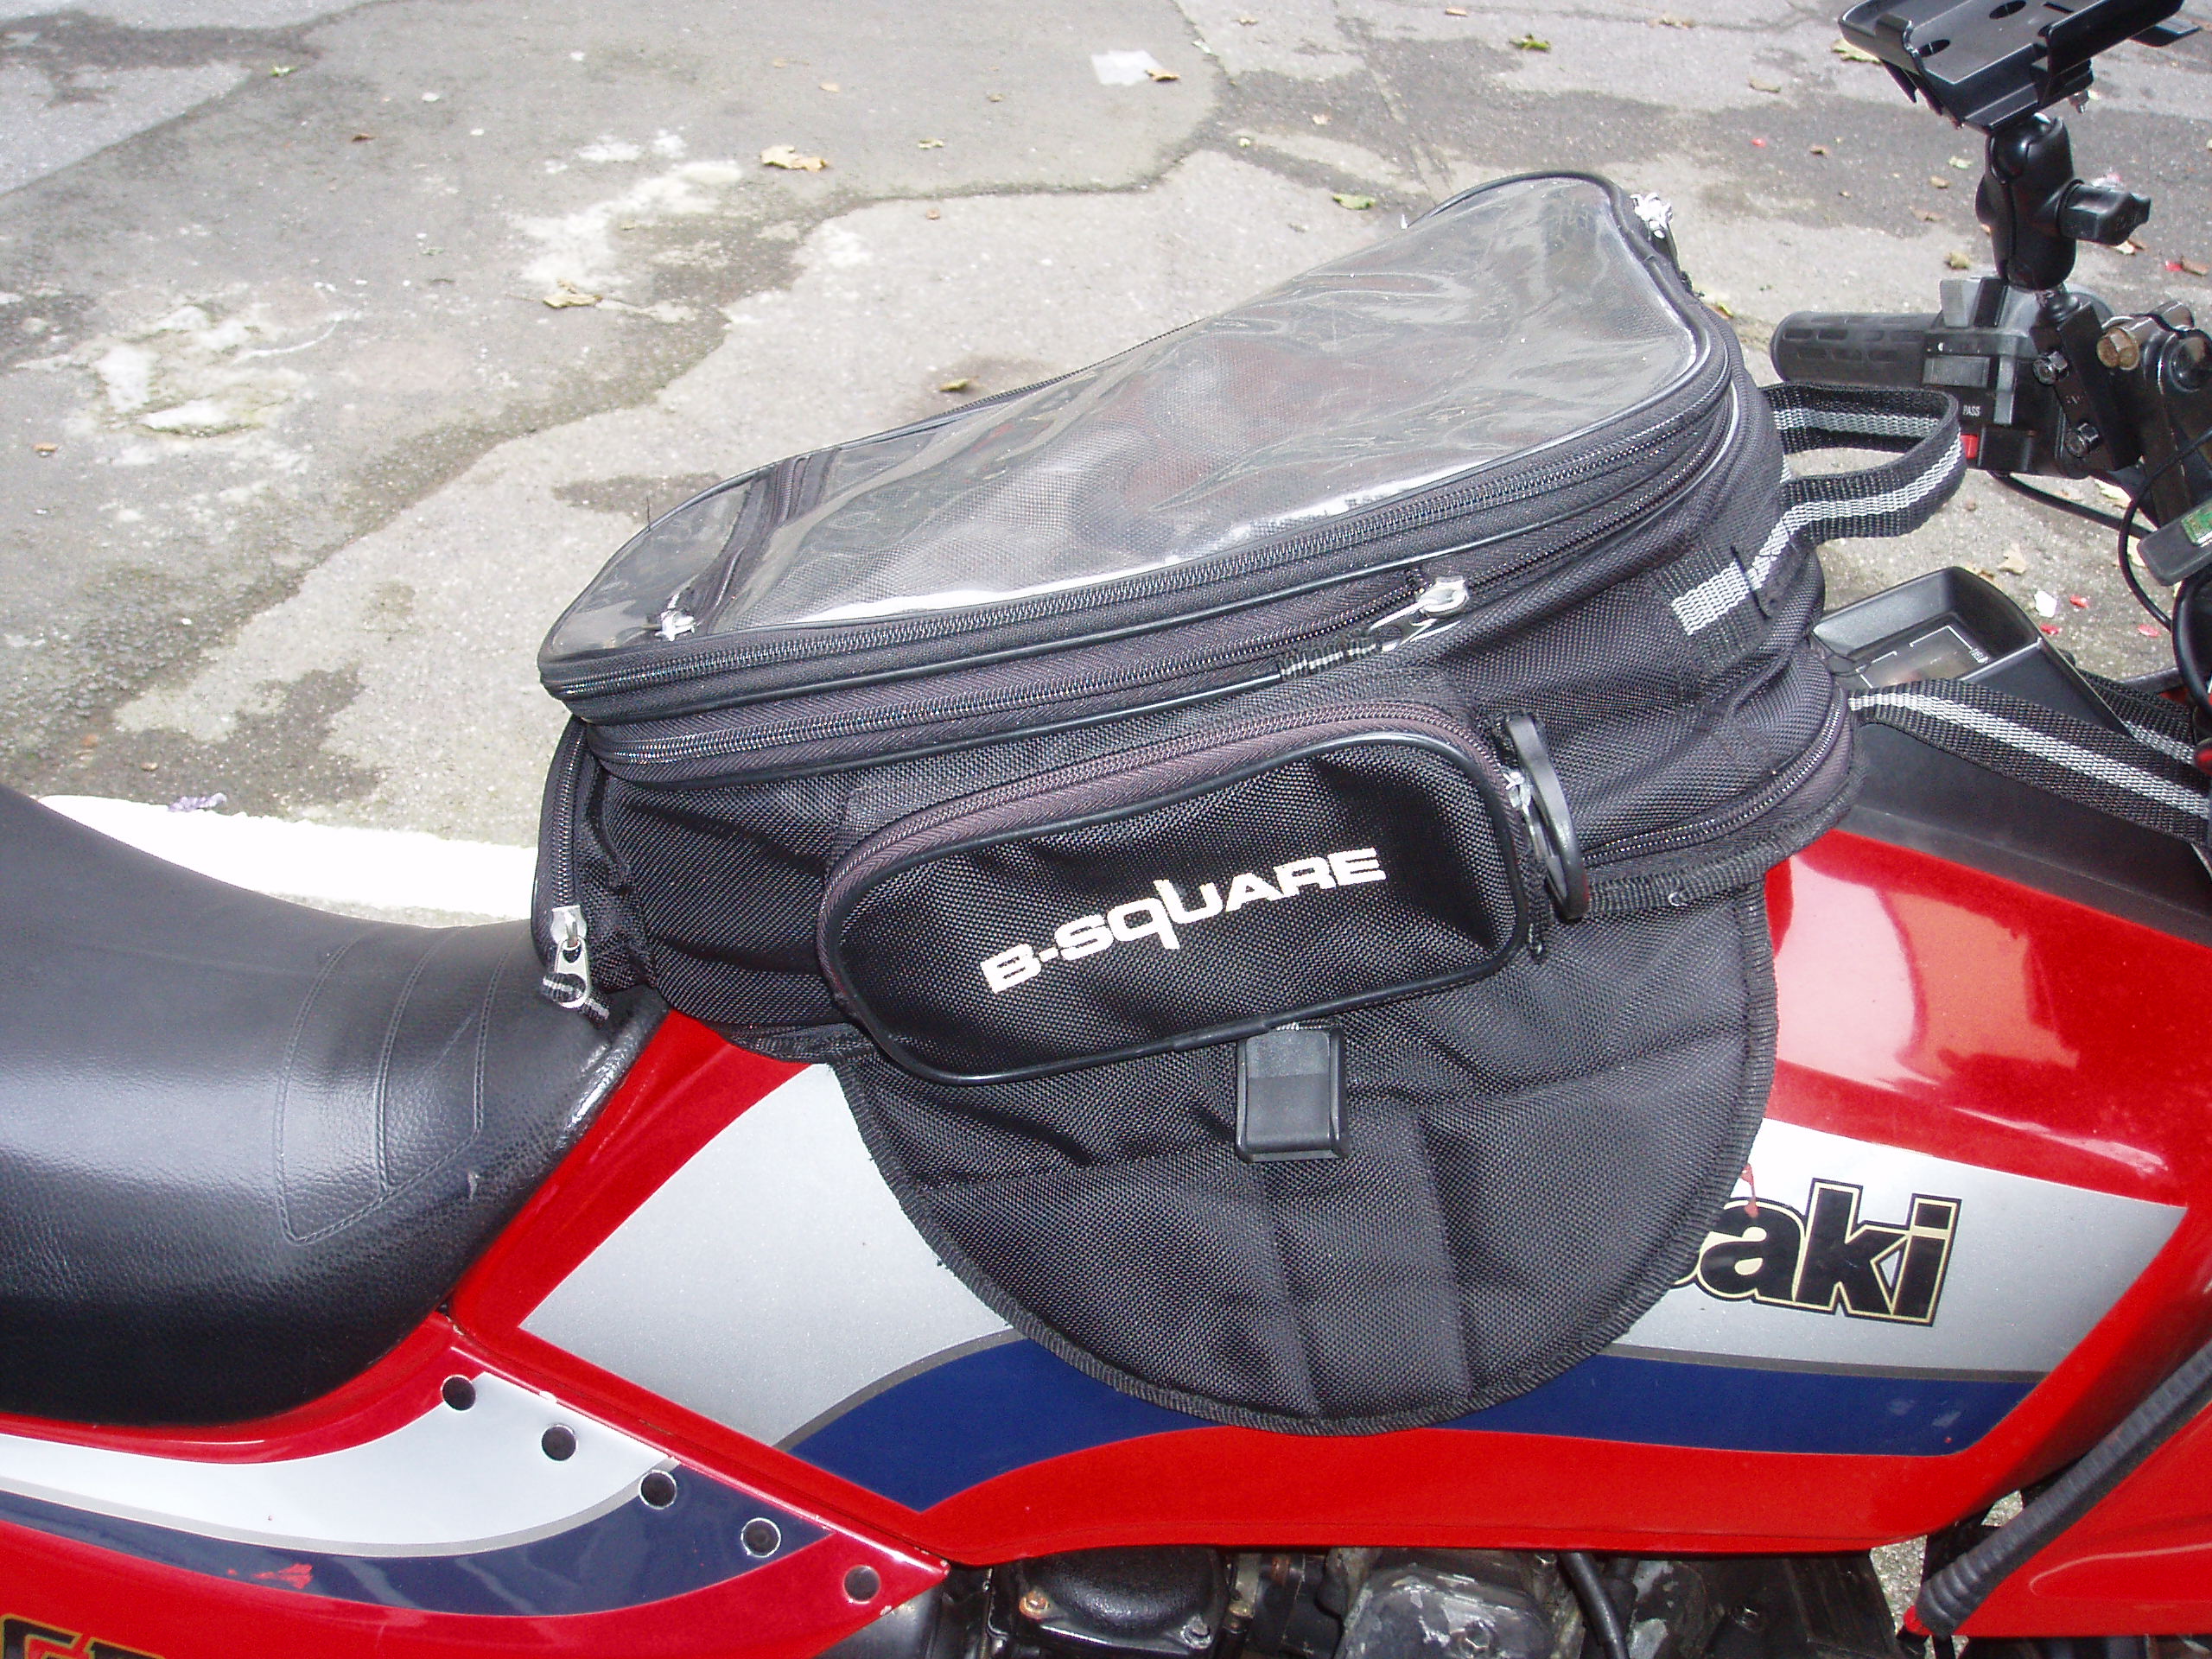 Used review: B-Square magnetic tank bag review